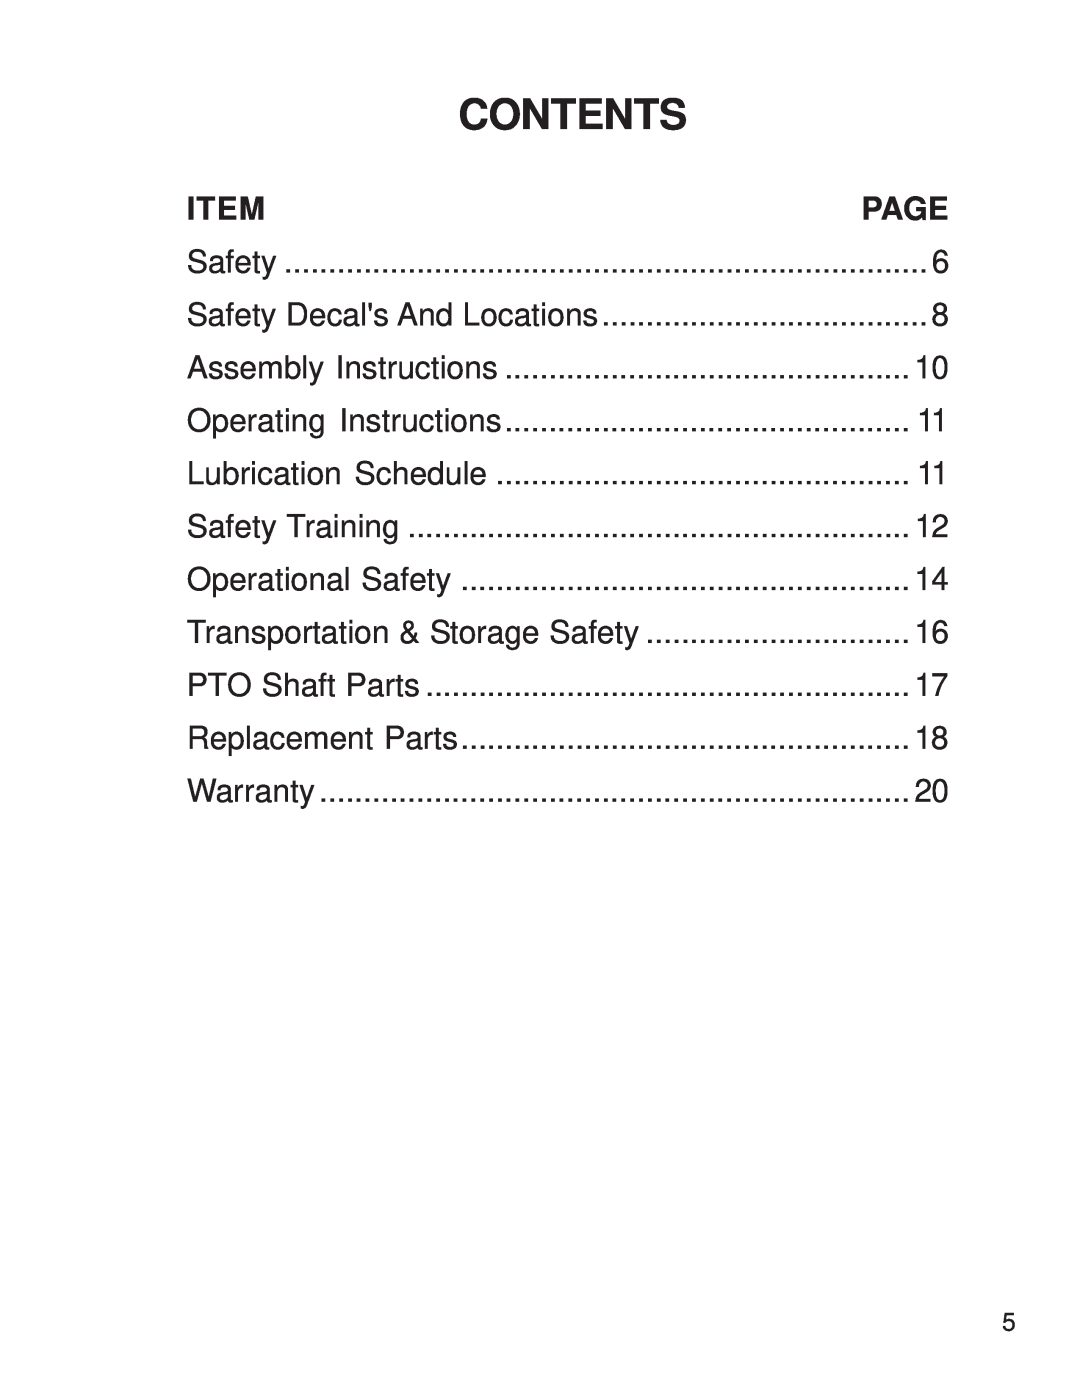 King Kutter phd-06s, phd-12s, phd-09s manual Contents, Page, Safety Decals And Locations, Transportation & Storage Safety 